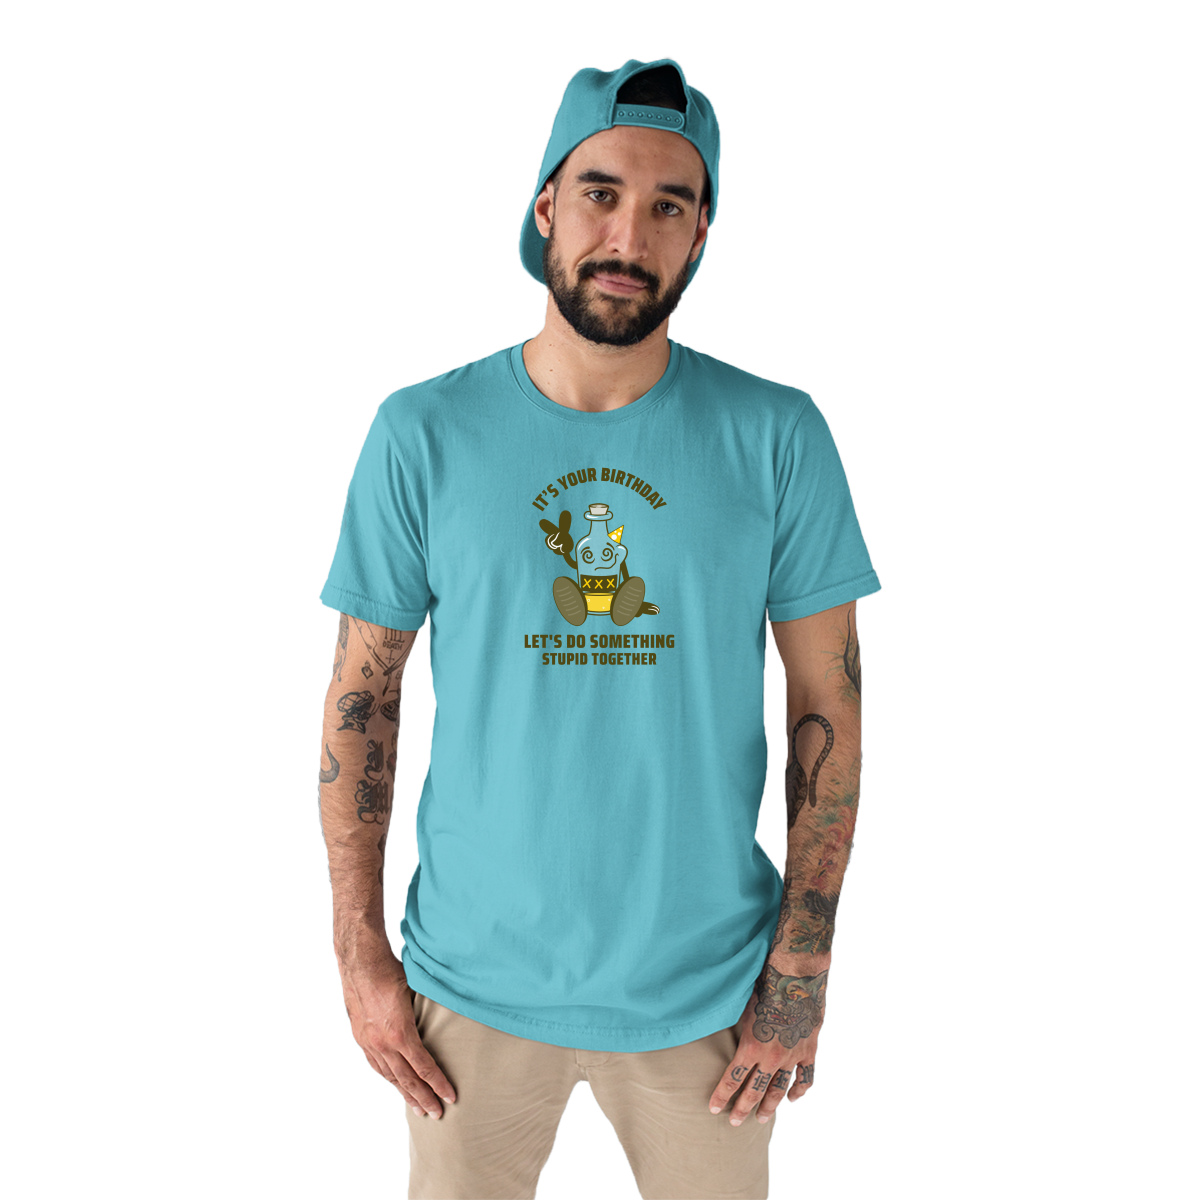 It is your Birthday Men's T-shirt | Turquoise